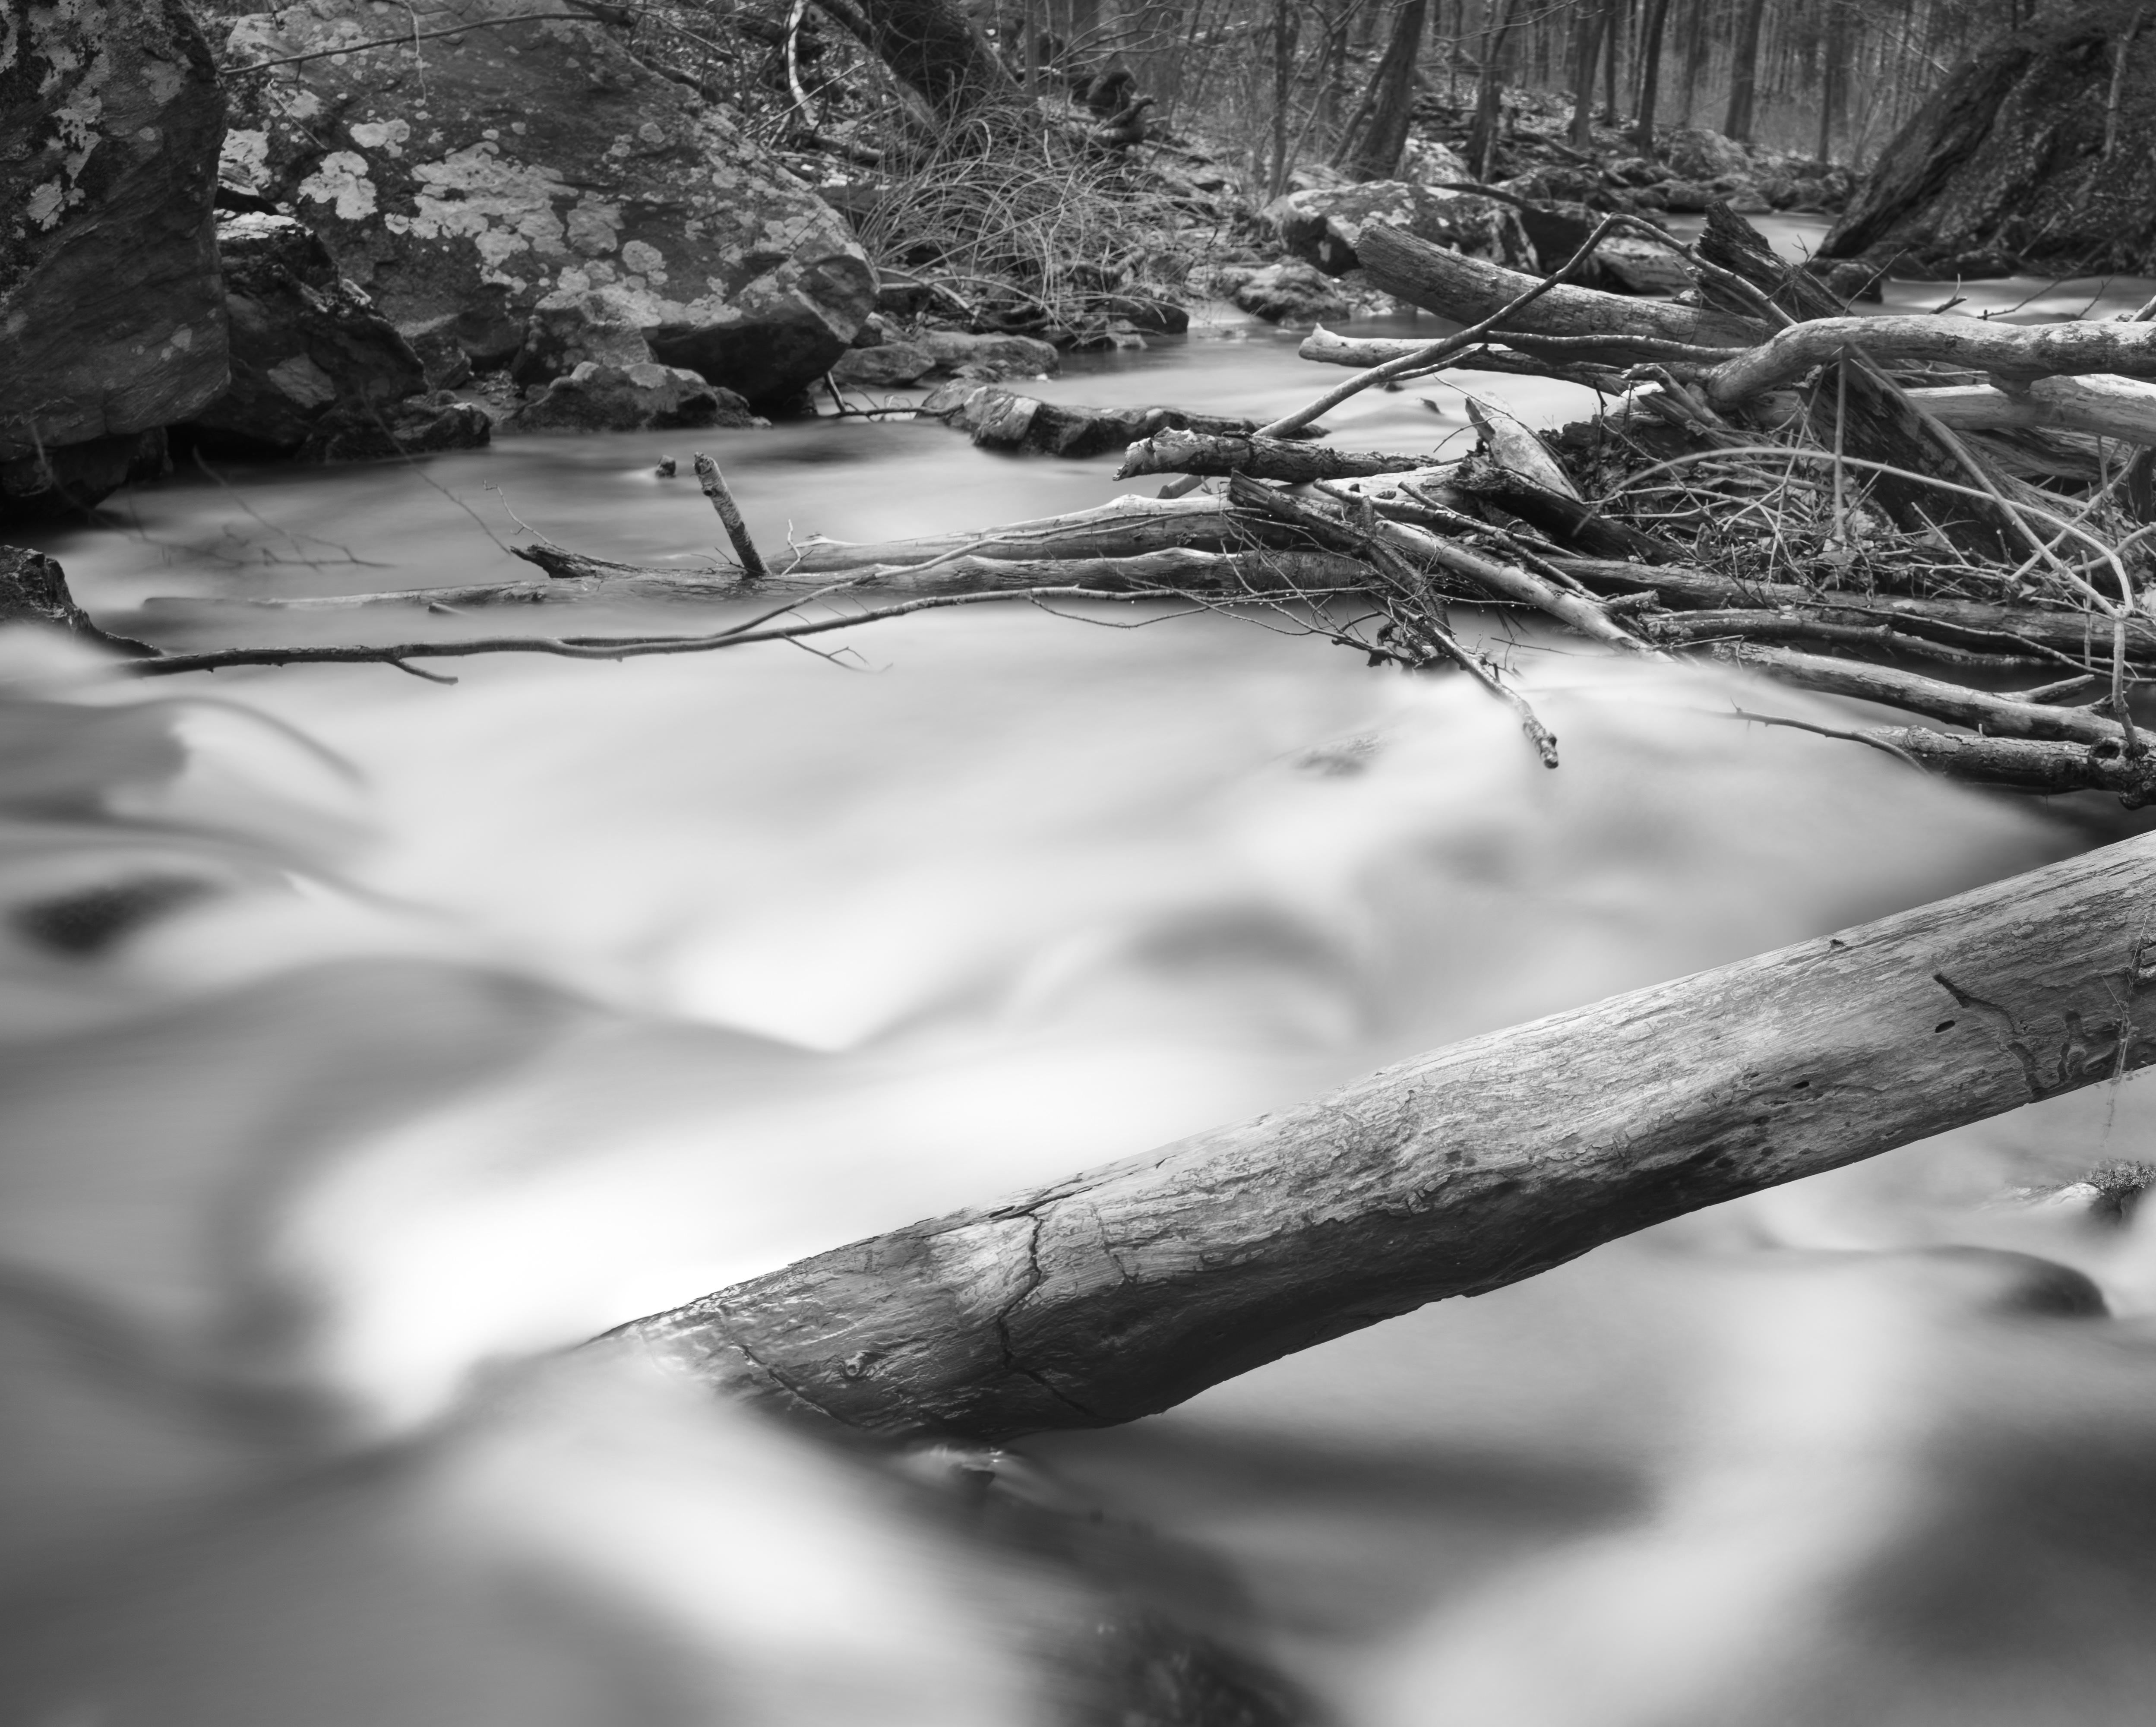 Howard Lewis Landscape Photograph -  Limited Edition Black and White Photograph - "Fallen Tree" 17 x 22